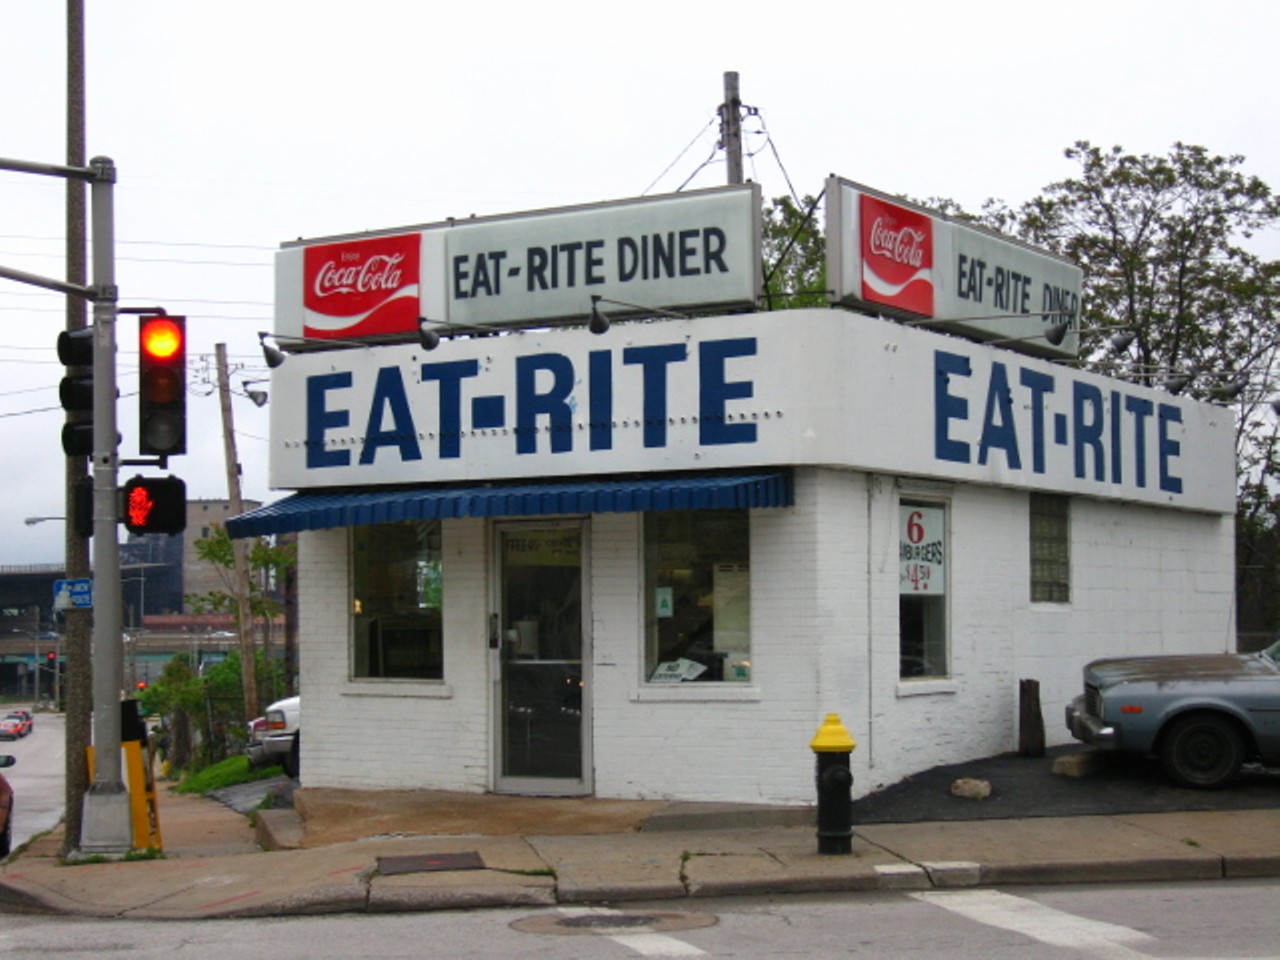 Eat-Rite Diner
622 Chouteau Ave.
St. Louis, MO 63102
(314) 621-9621
Eat-Rite Diner is the very definition of hole-in-the-wall. Worn exterior, tiny interior, cheap, good food and customers from all walks of life make up this iconic diner. While Eat-Rite closed its doors recently, its owners are looking to hand the reigns over to a new owner or manager.    Sound like you? Get the details here. Photo  courtesy of Flickr / Runs With Scissors.